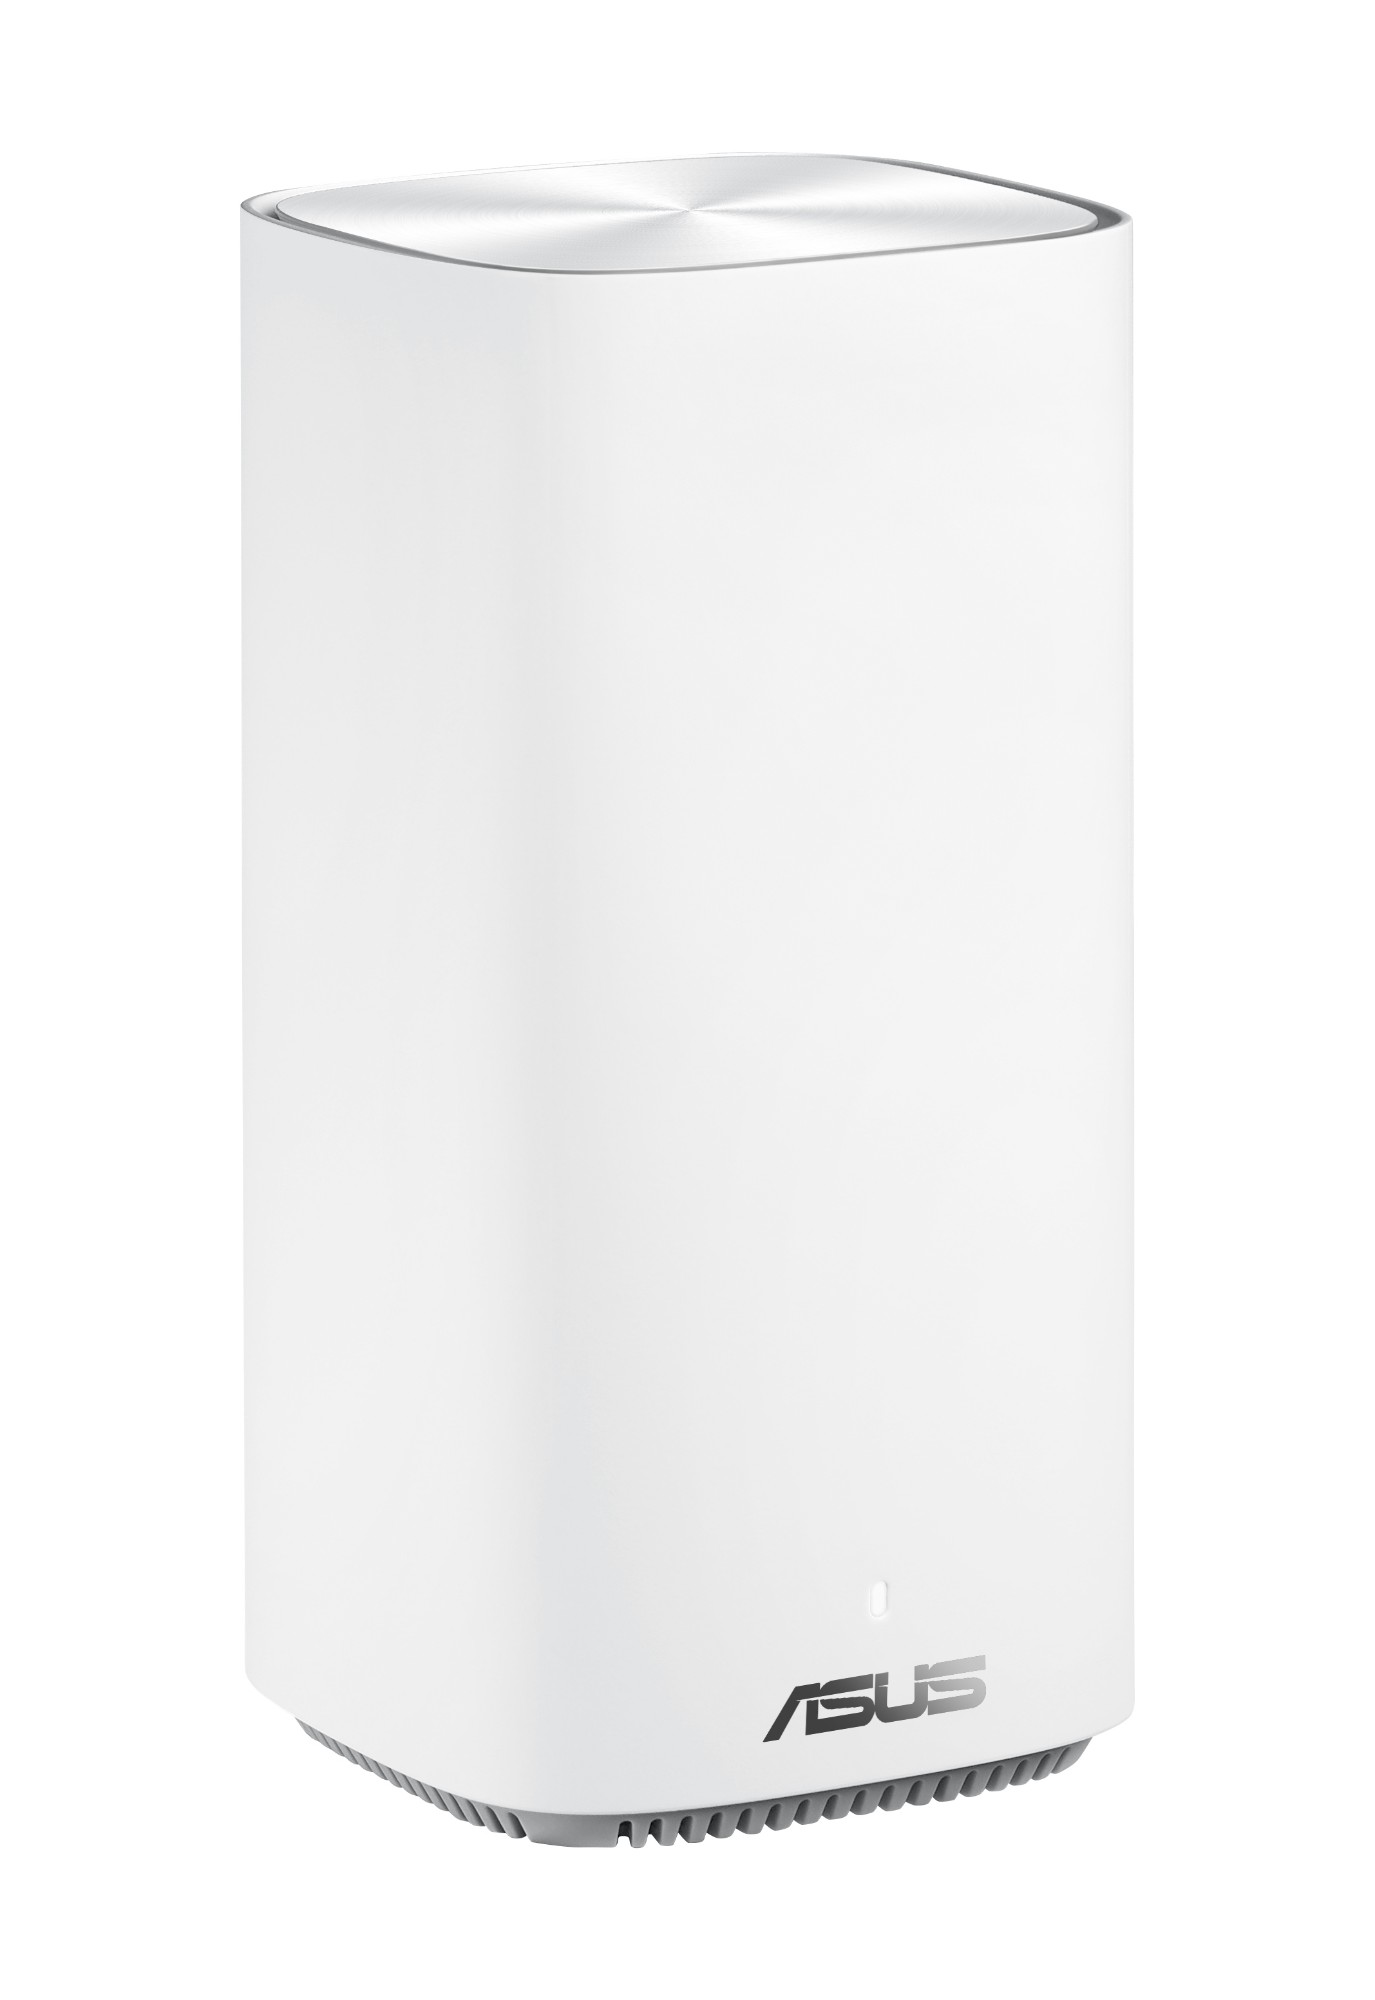 ASUS ZenWiFi AC (CD6) AC1500 Mesh System, Pack of 1 - White